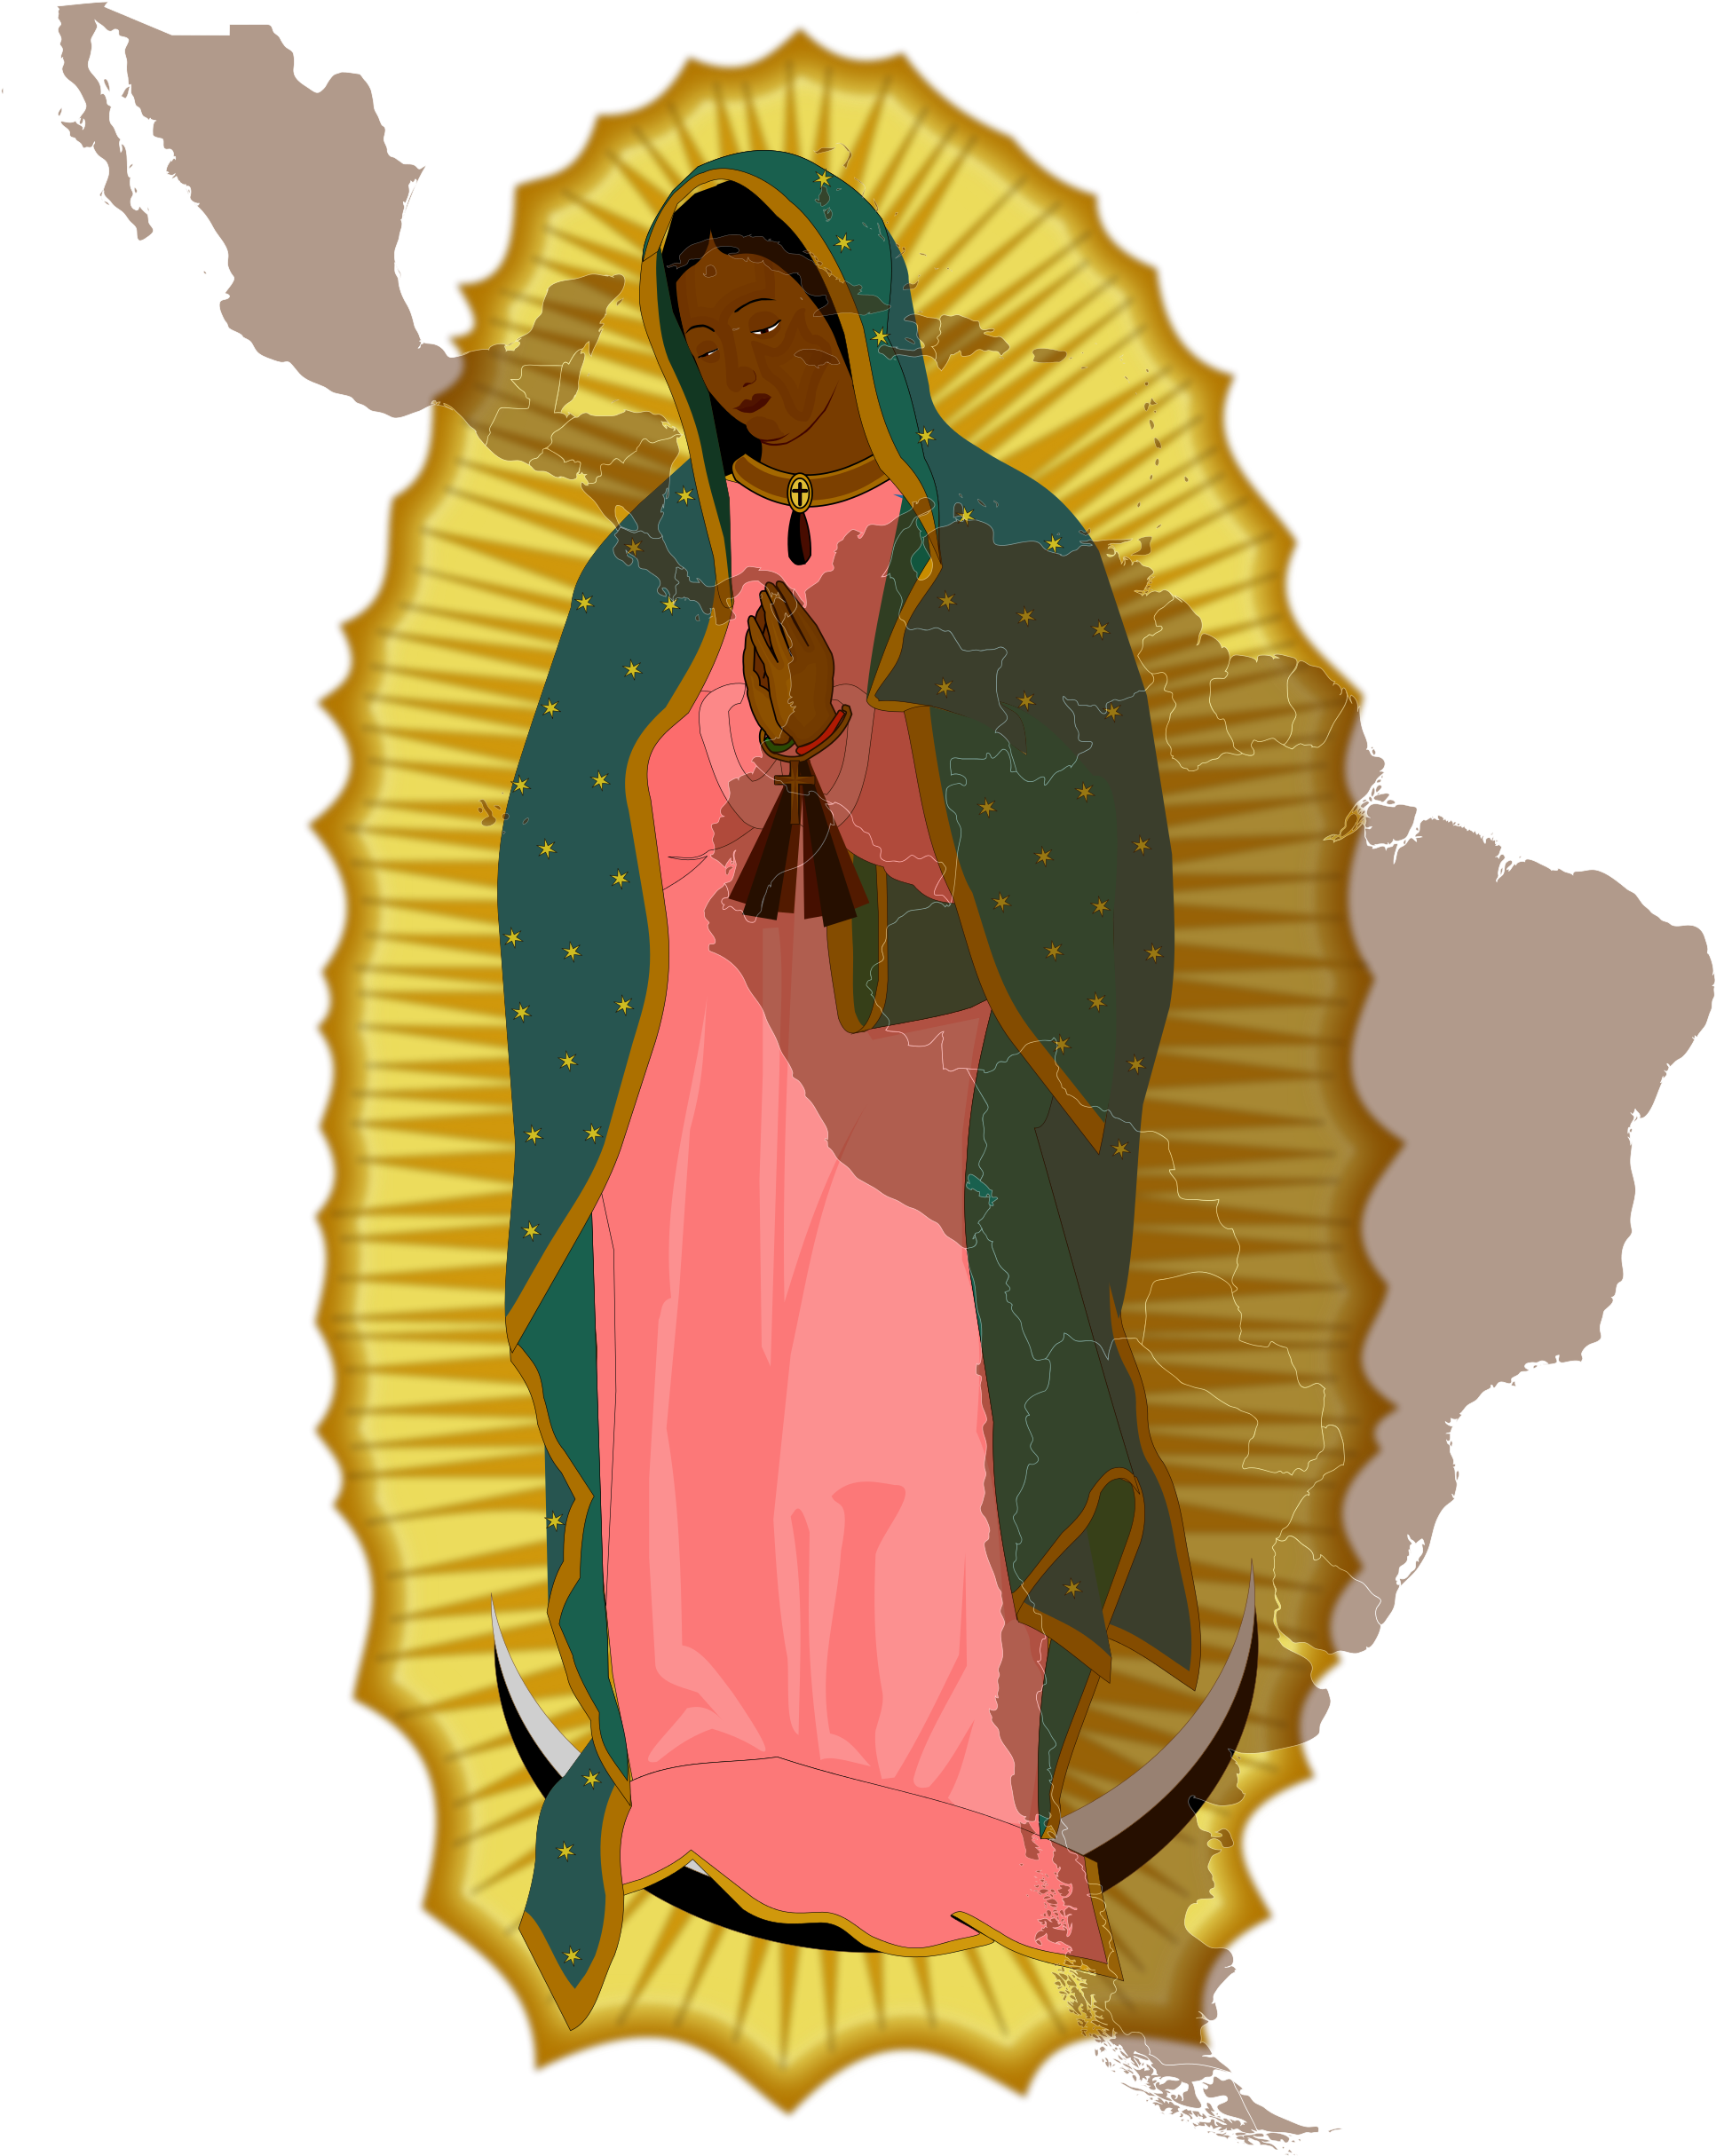 Download File Our Of Guadalupe Svg Wikimedia Commons - 2017 Global Impunity Index (2000x2500), Png Download